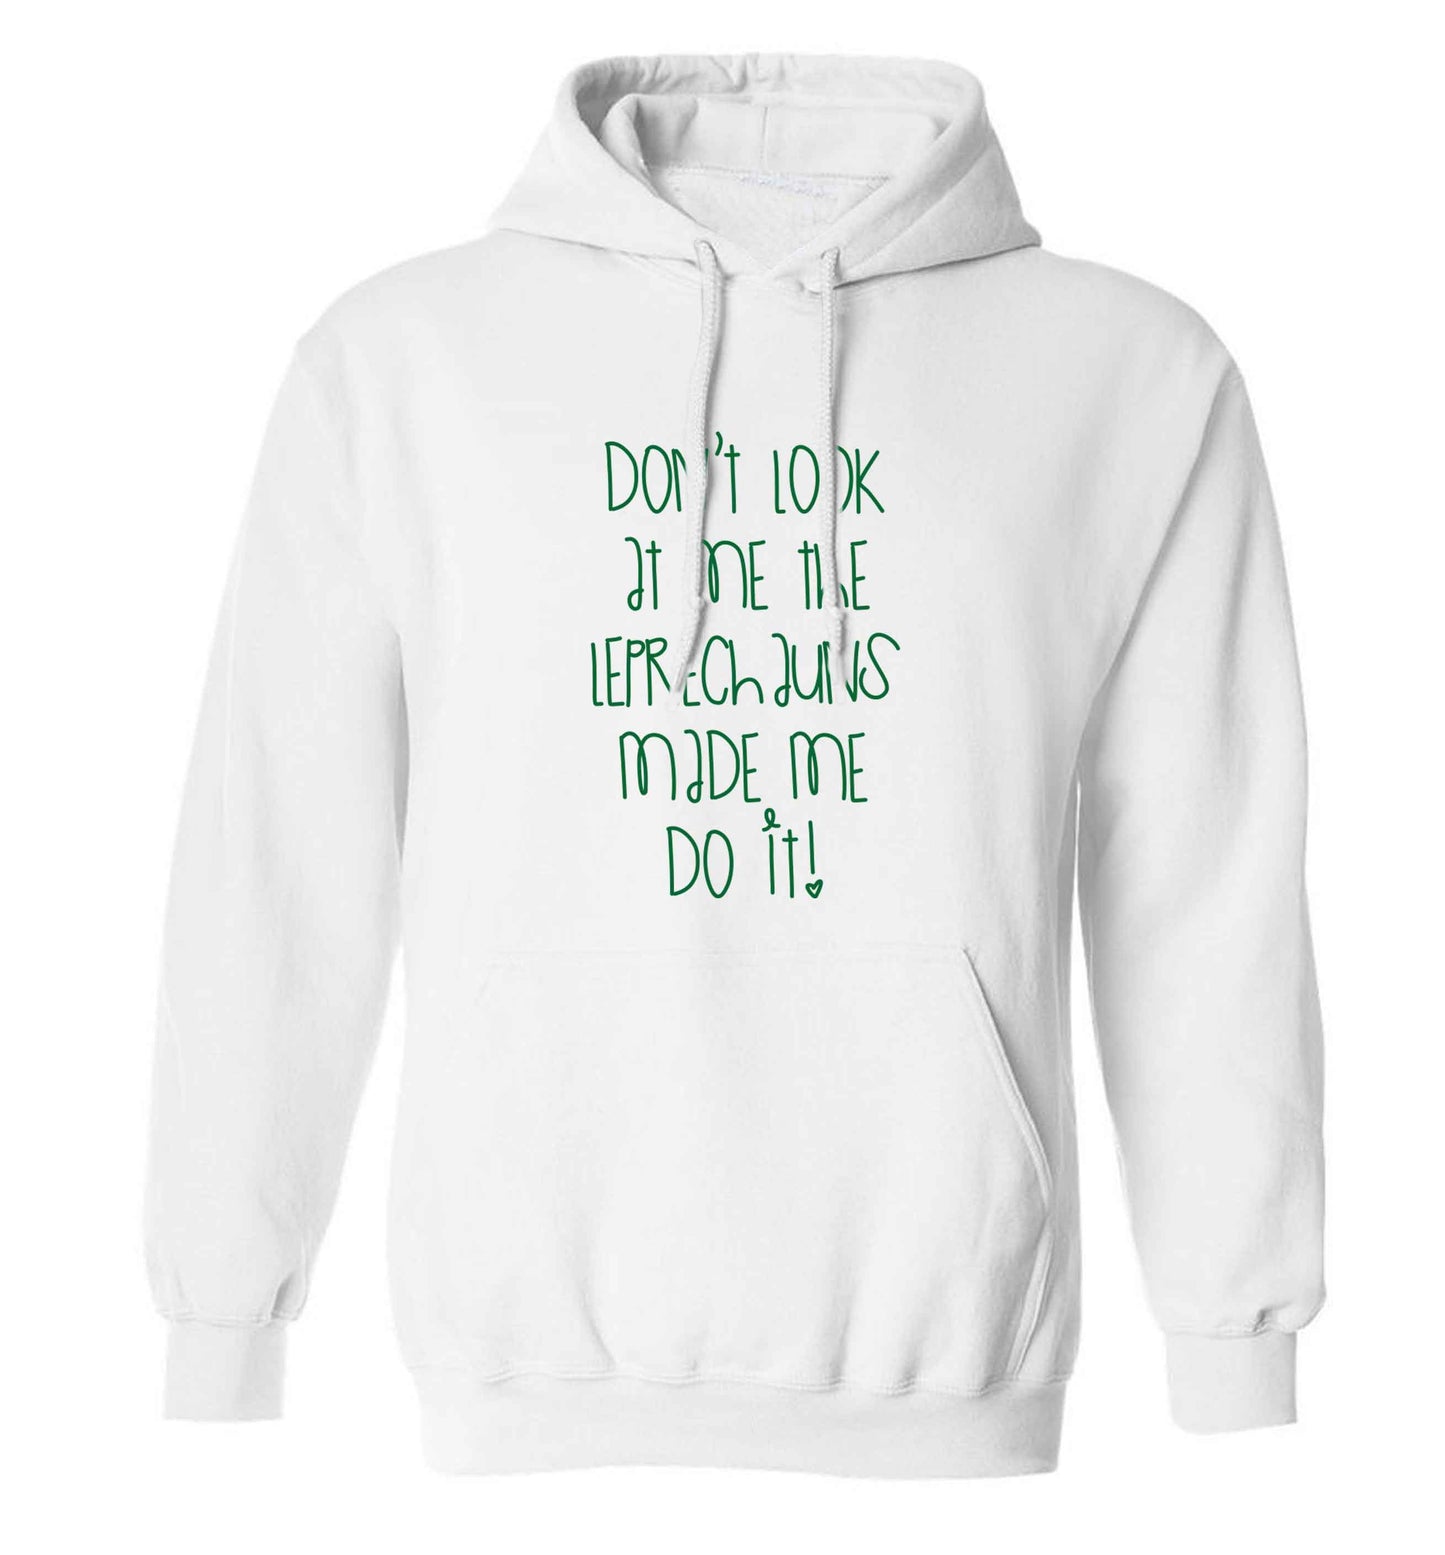 Don't look at me the leprechauns made me do it adults unisex white hoodie 2XL